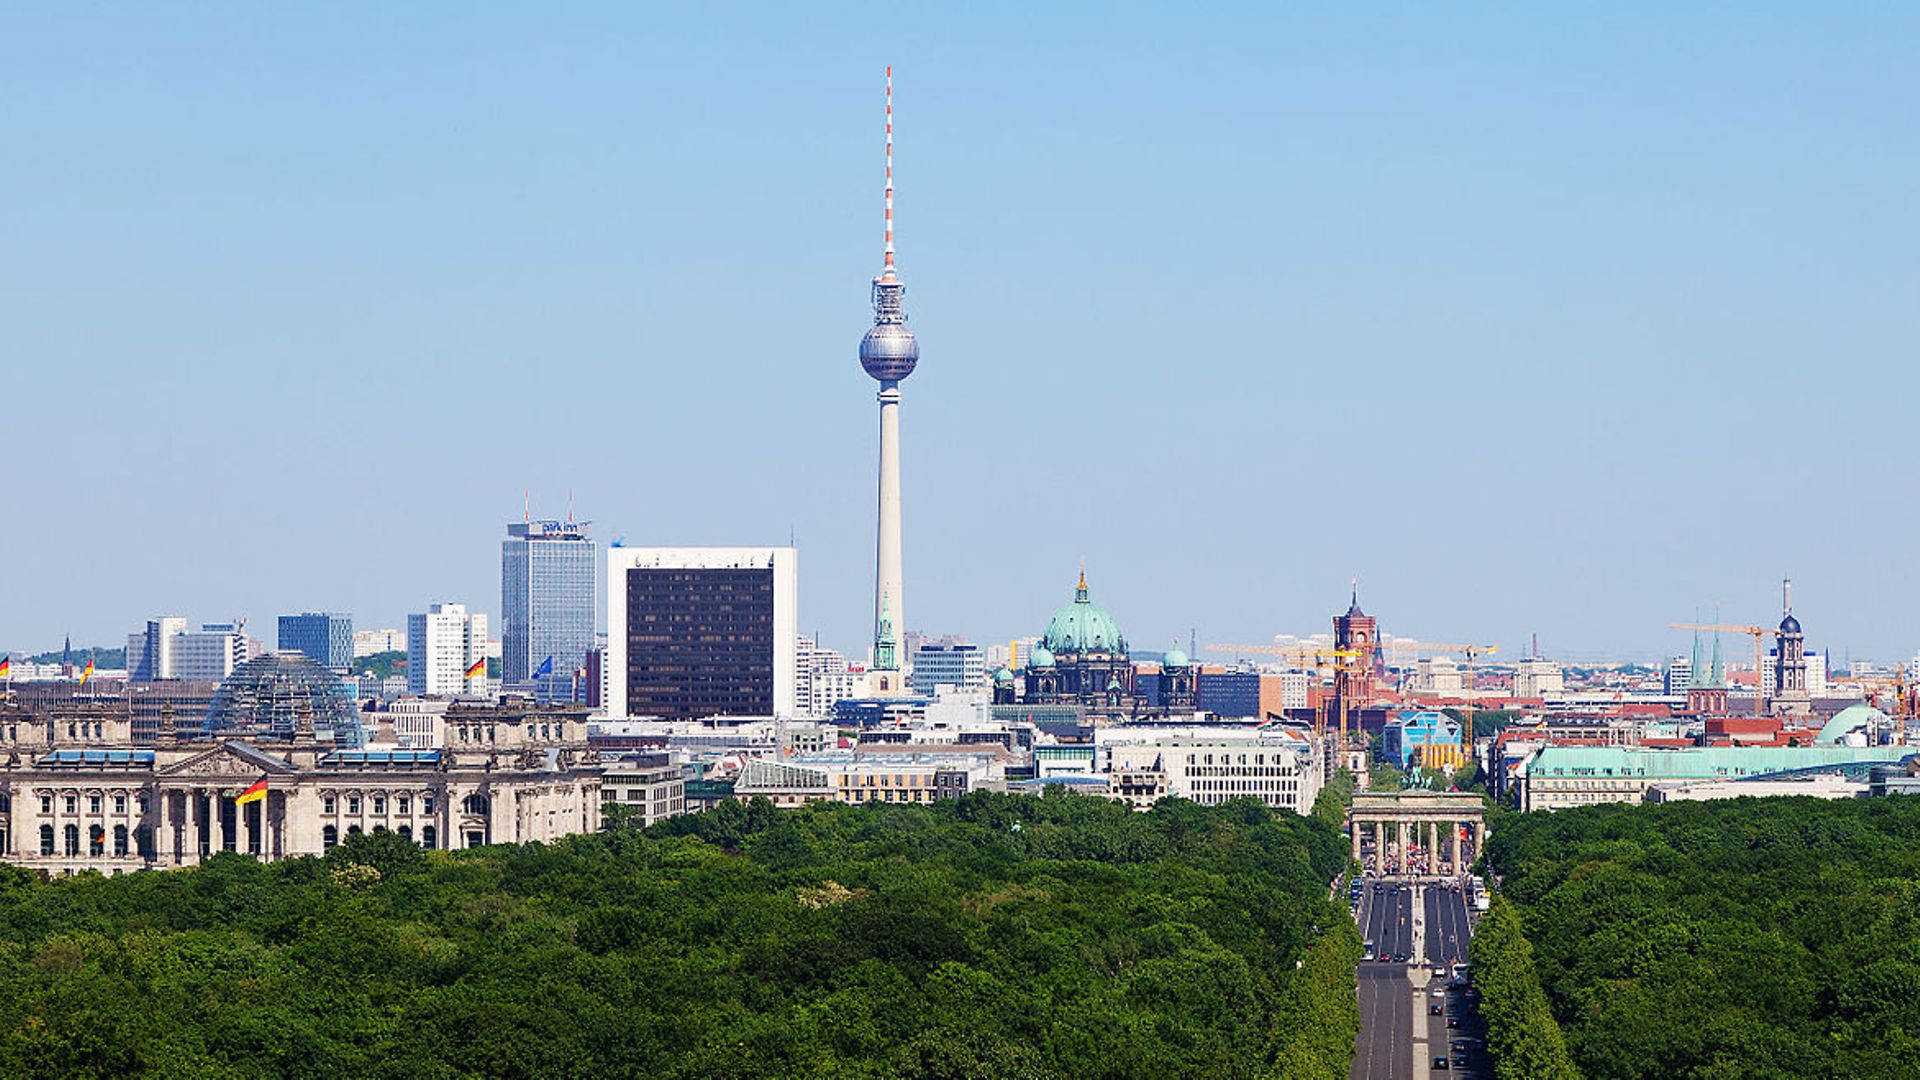 The formula E race in central Berlin took place in beautiful sunshine.